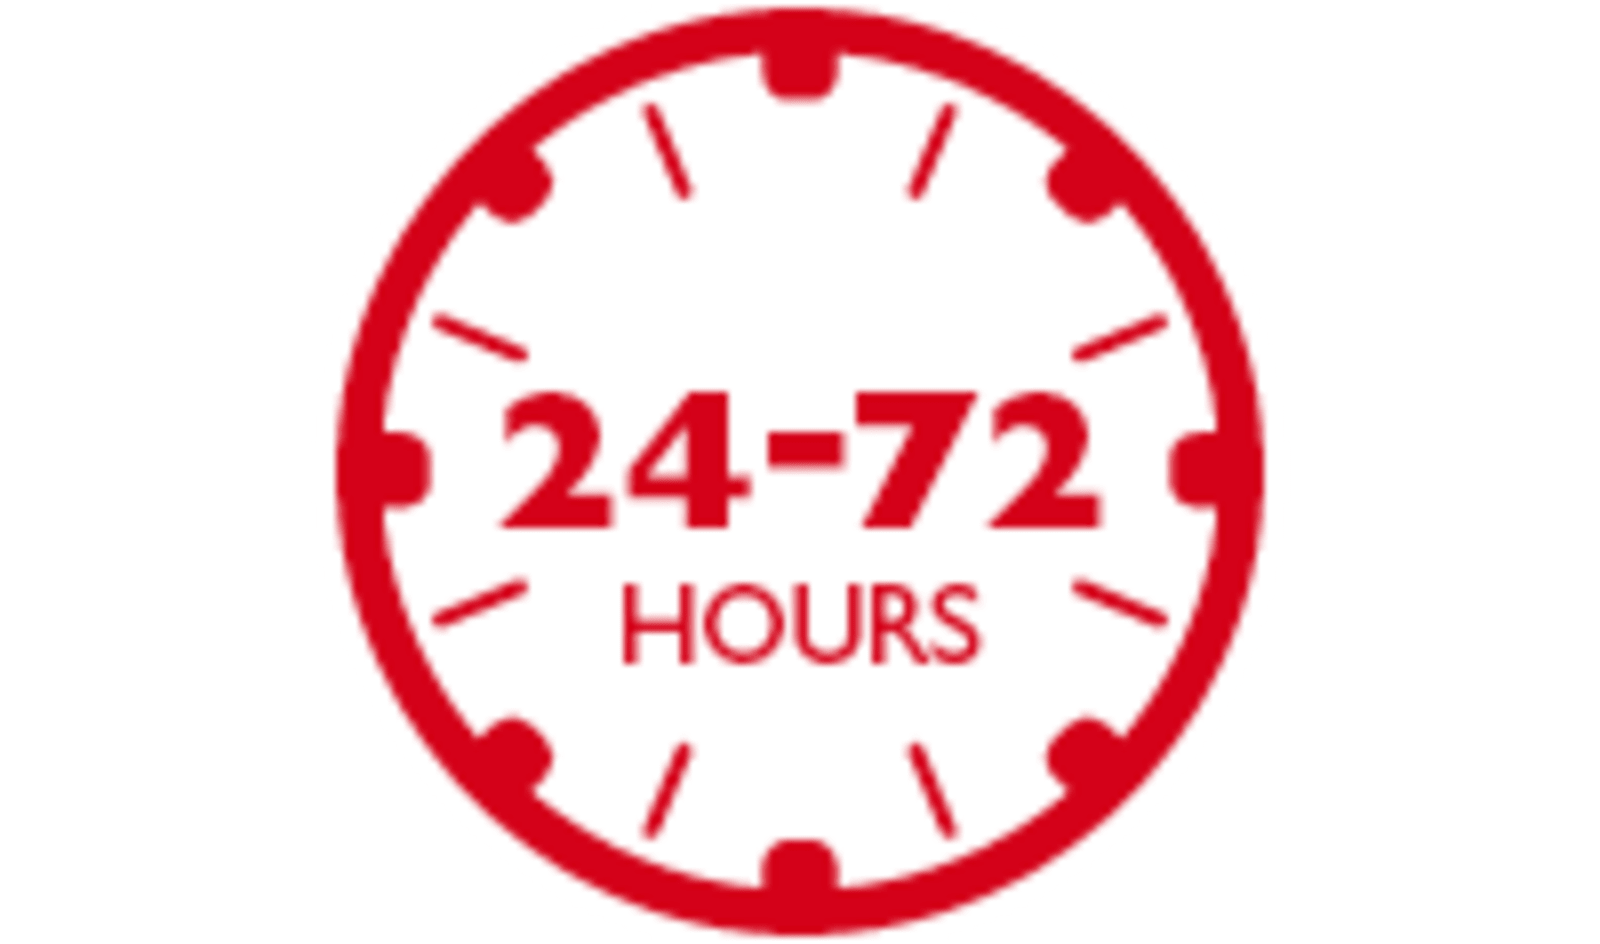 Clock icon - 24 to 72 hours